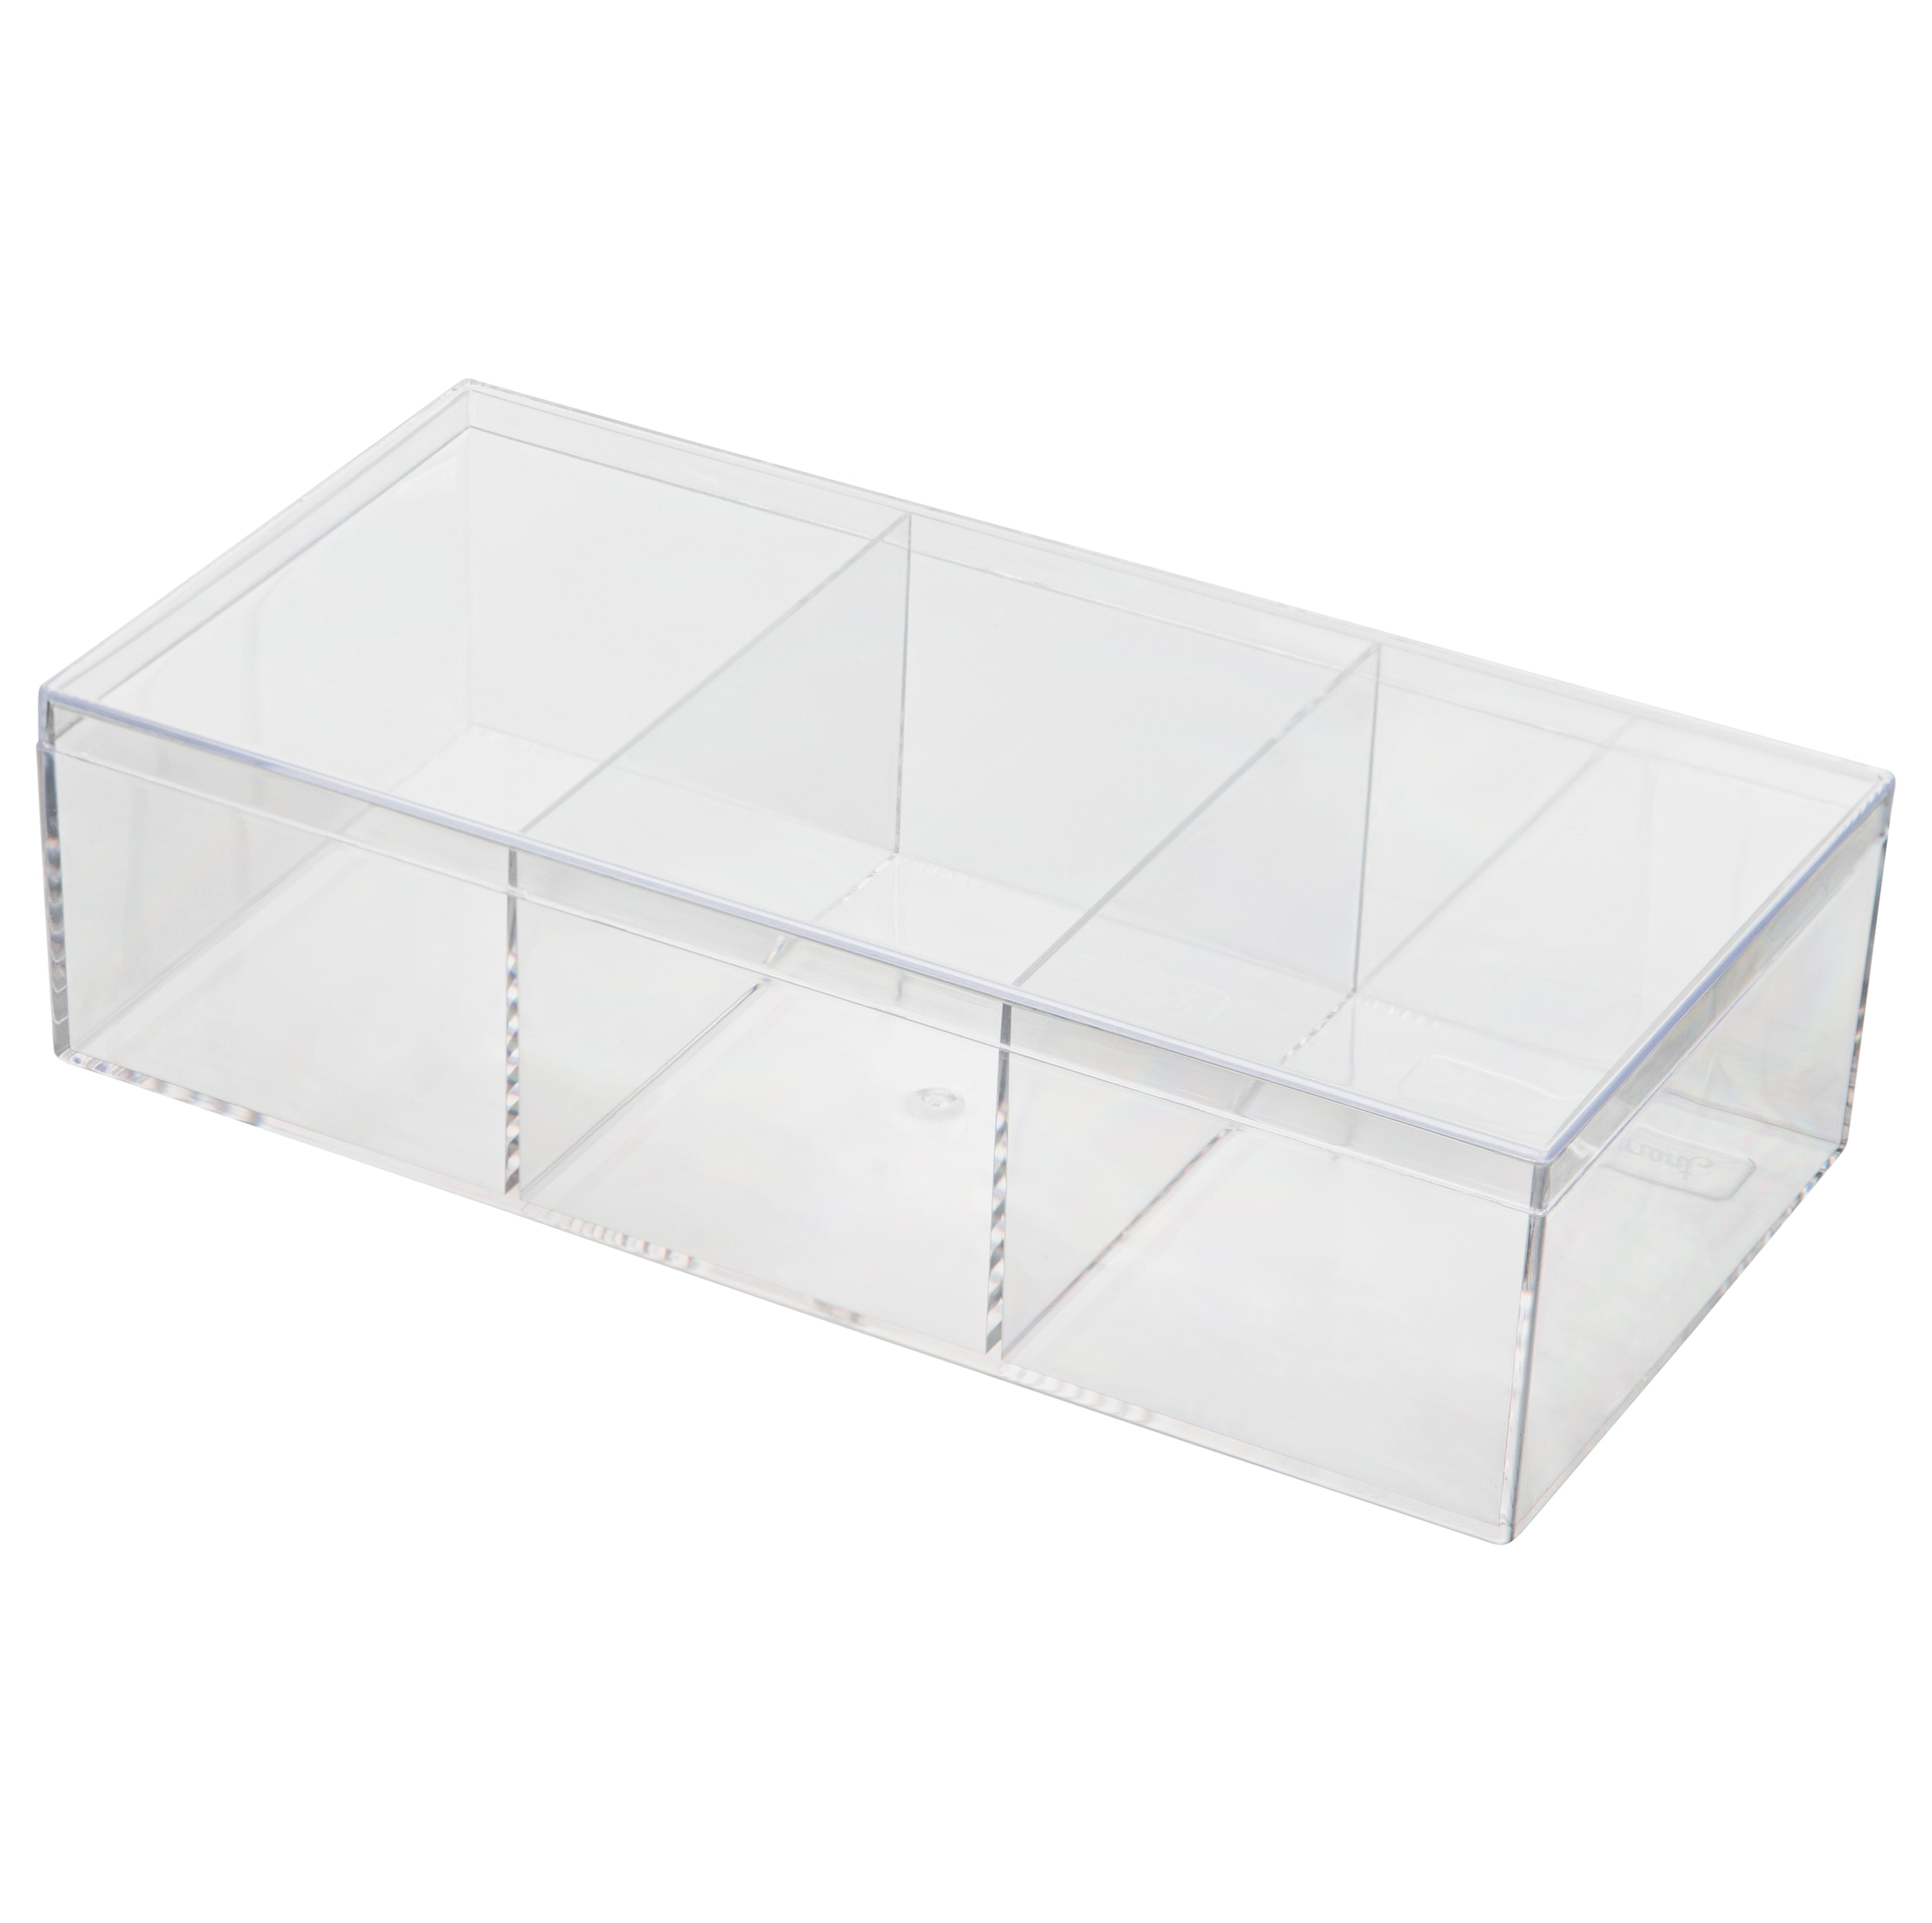  Hammont Clear Acrylic Boxes - 2 Pack - 4''x4''x4'' - Small Cube  Lucite Boxes for Gifts, Weddings, Party Favors, Treats, Candies &  Accessories, Plastic Storage Boxes : Home & Kitchen